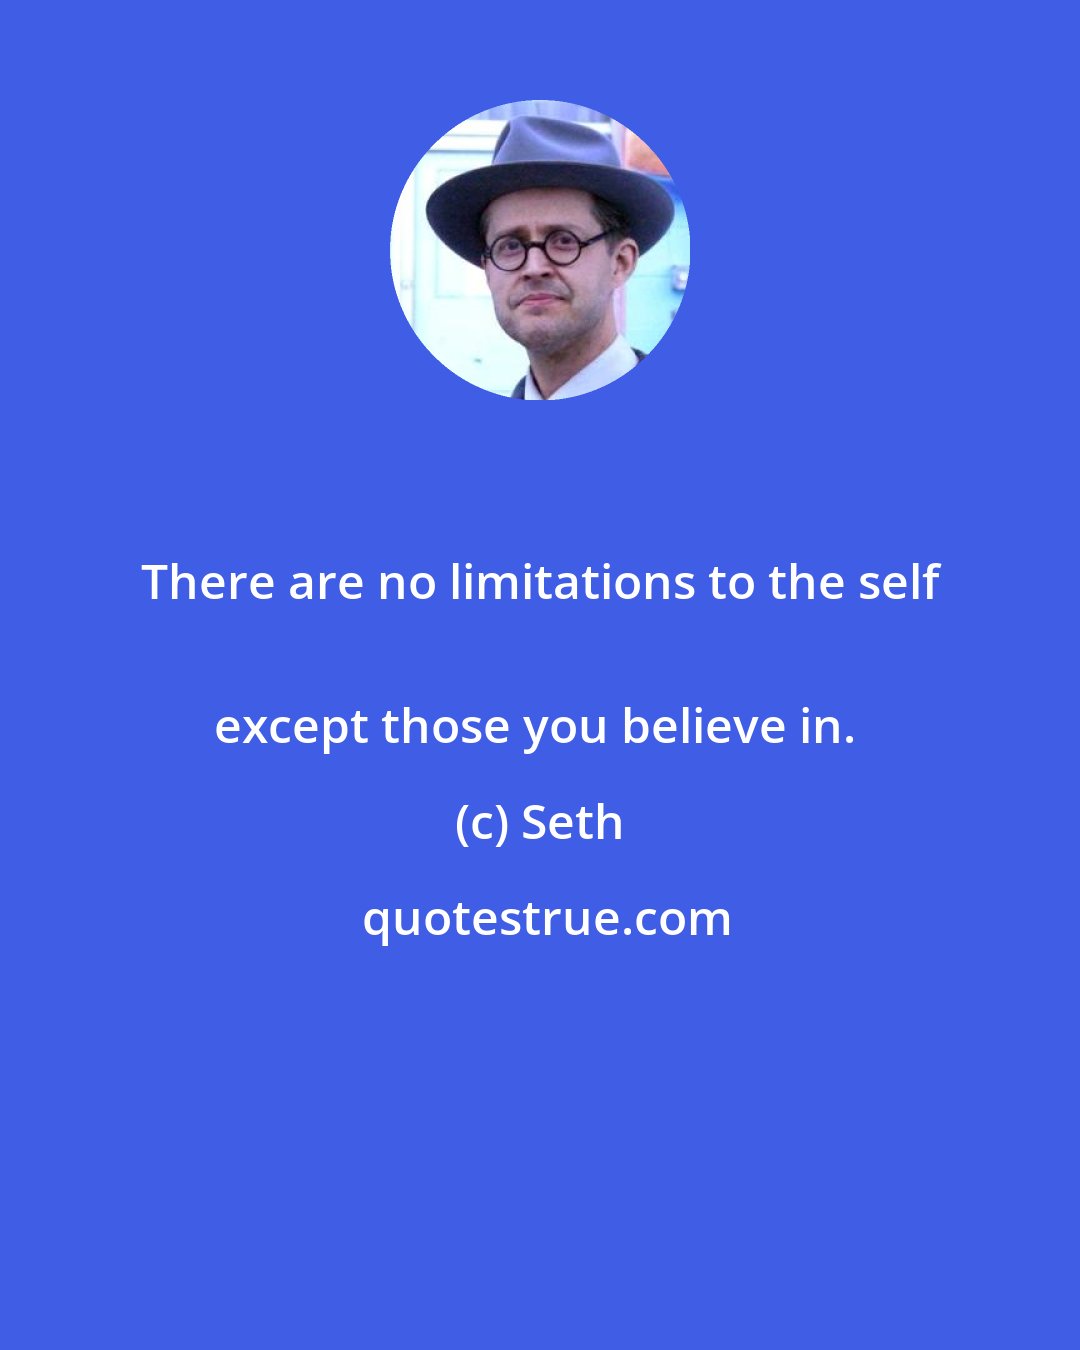 Seth: There are no limitations to the self 
except those you believe in.